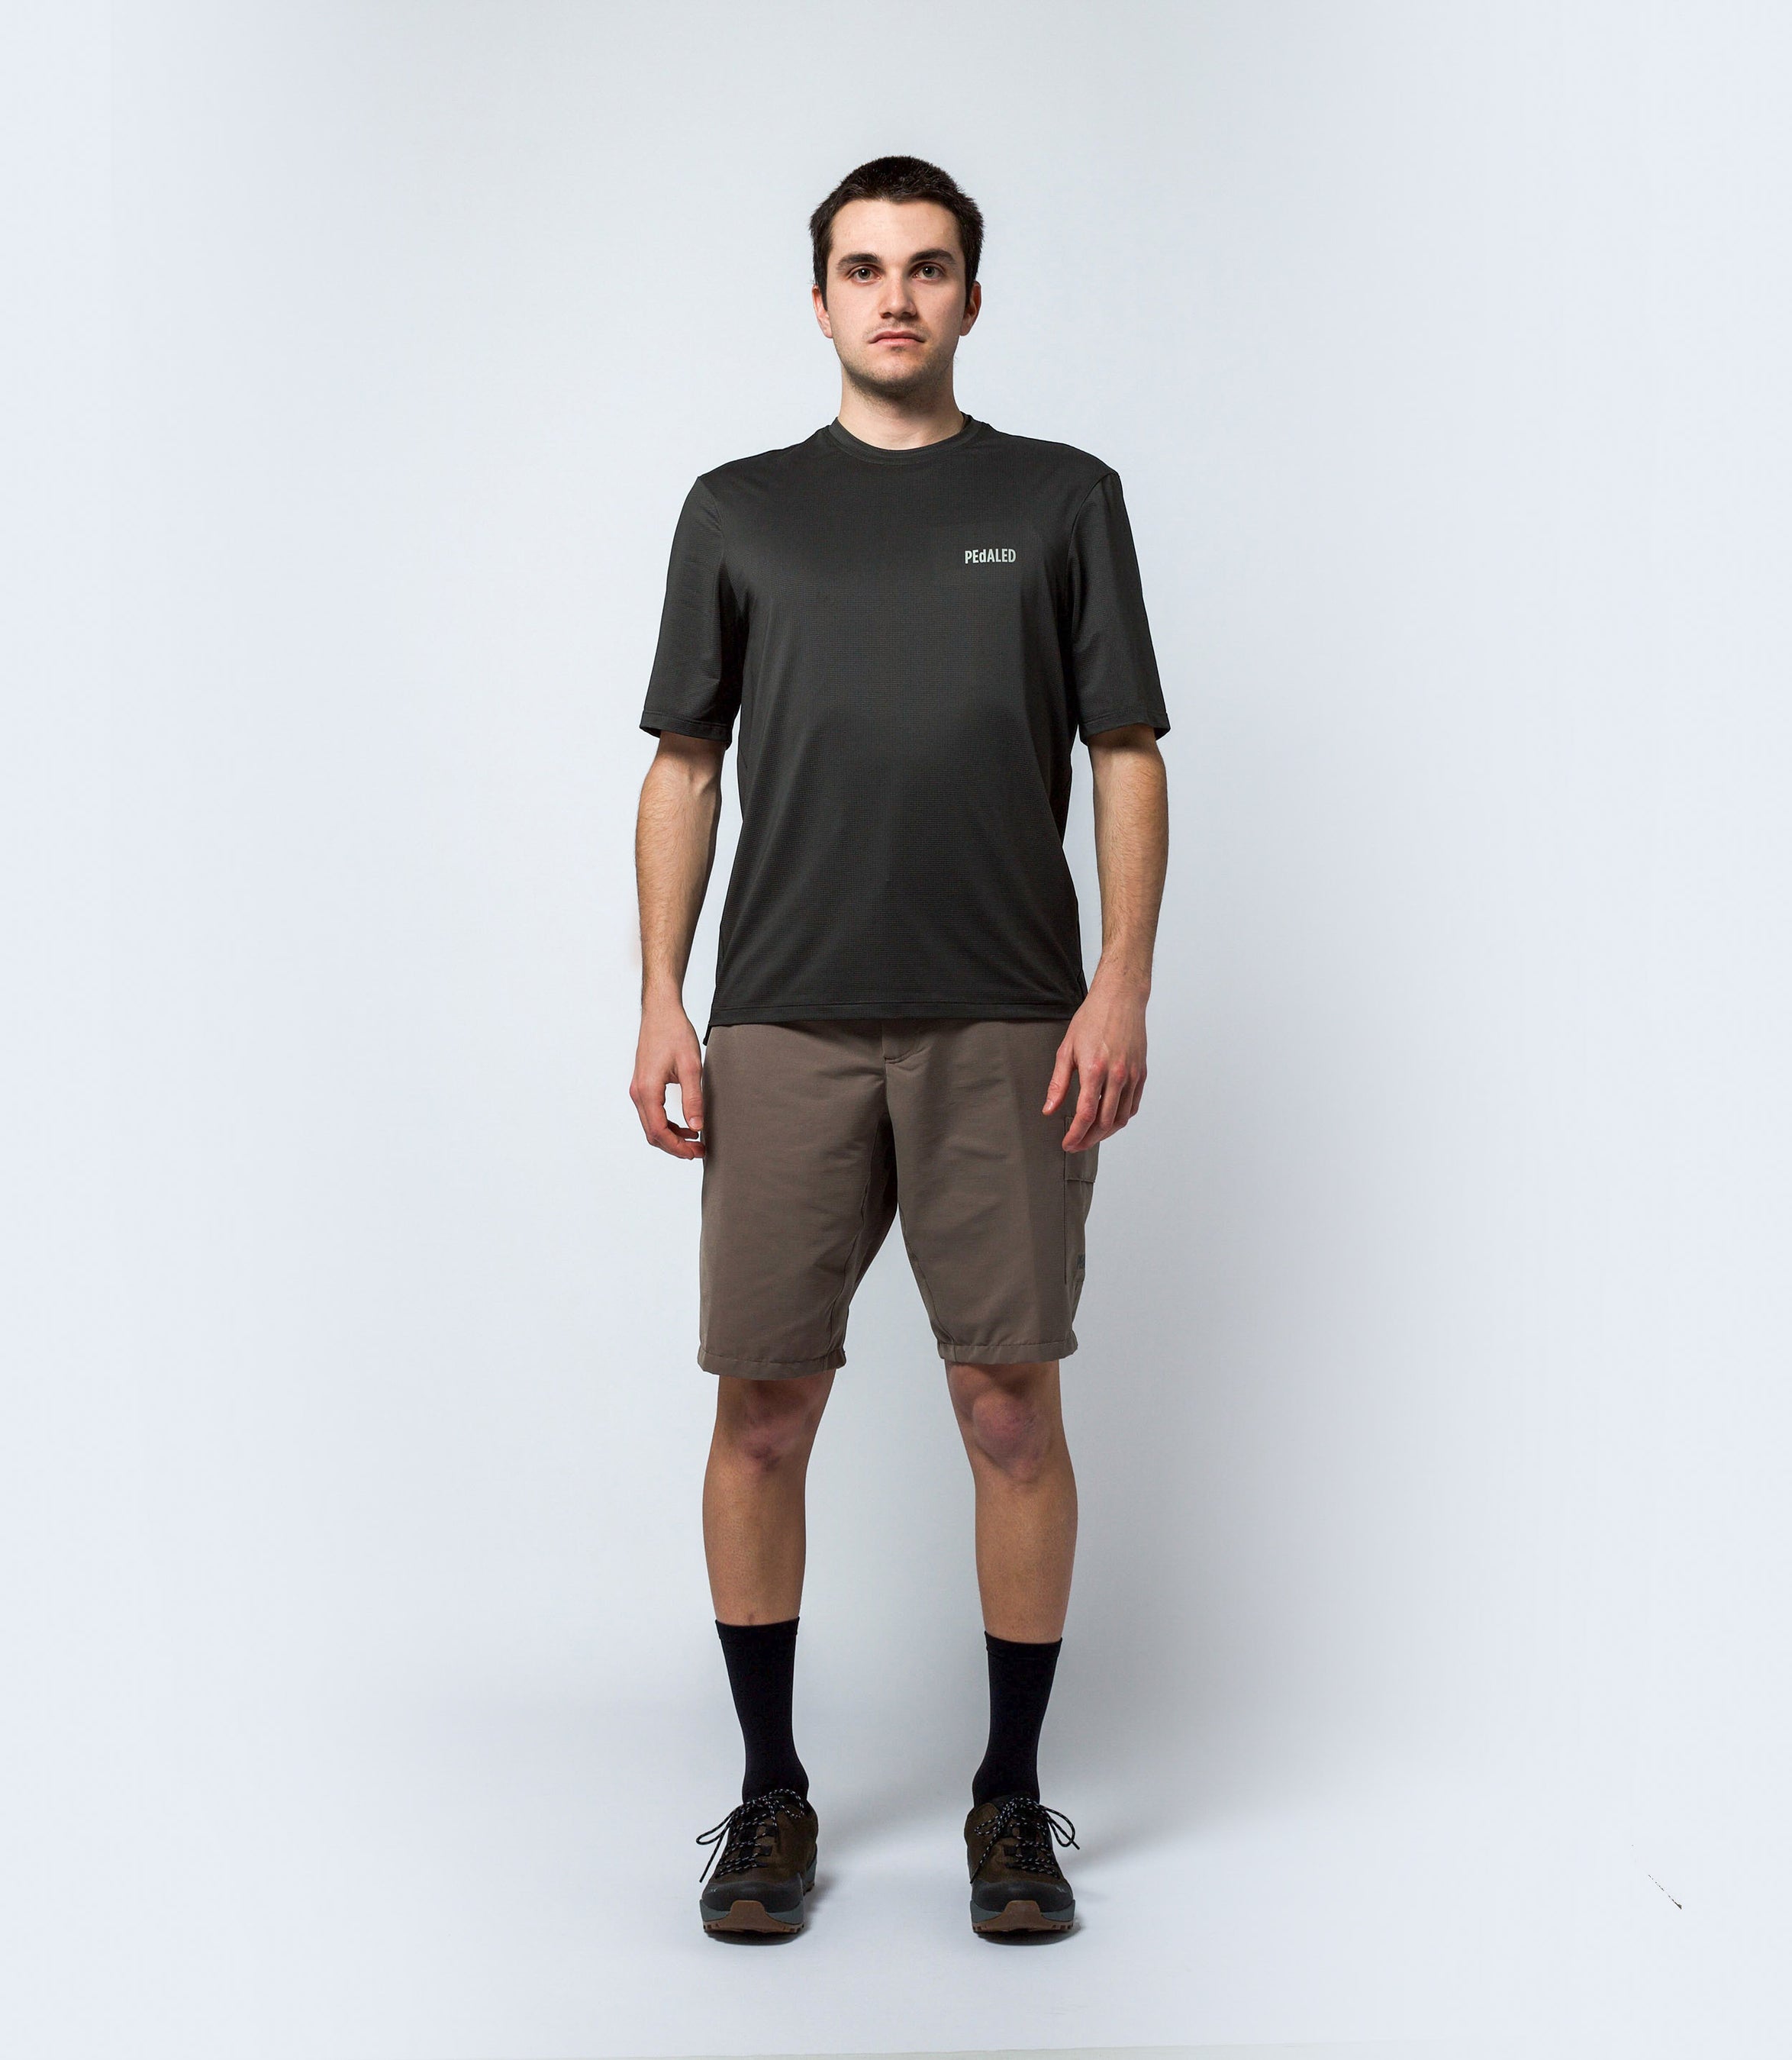 23SSHJA80PE_3_cycling gravel shorts bikepacking brown jary total body front pedaled